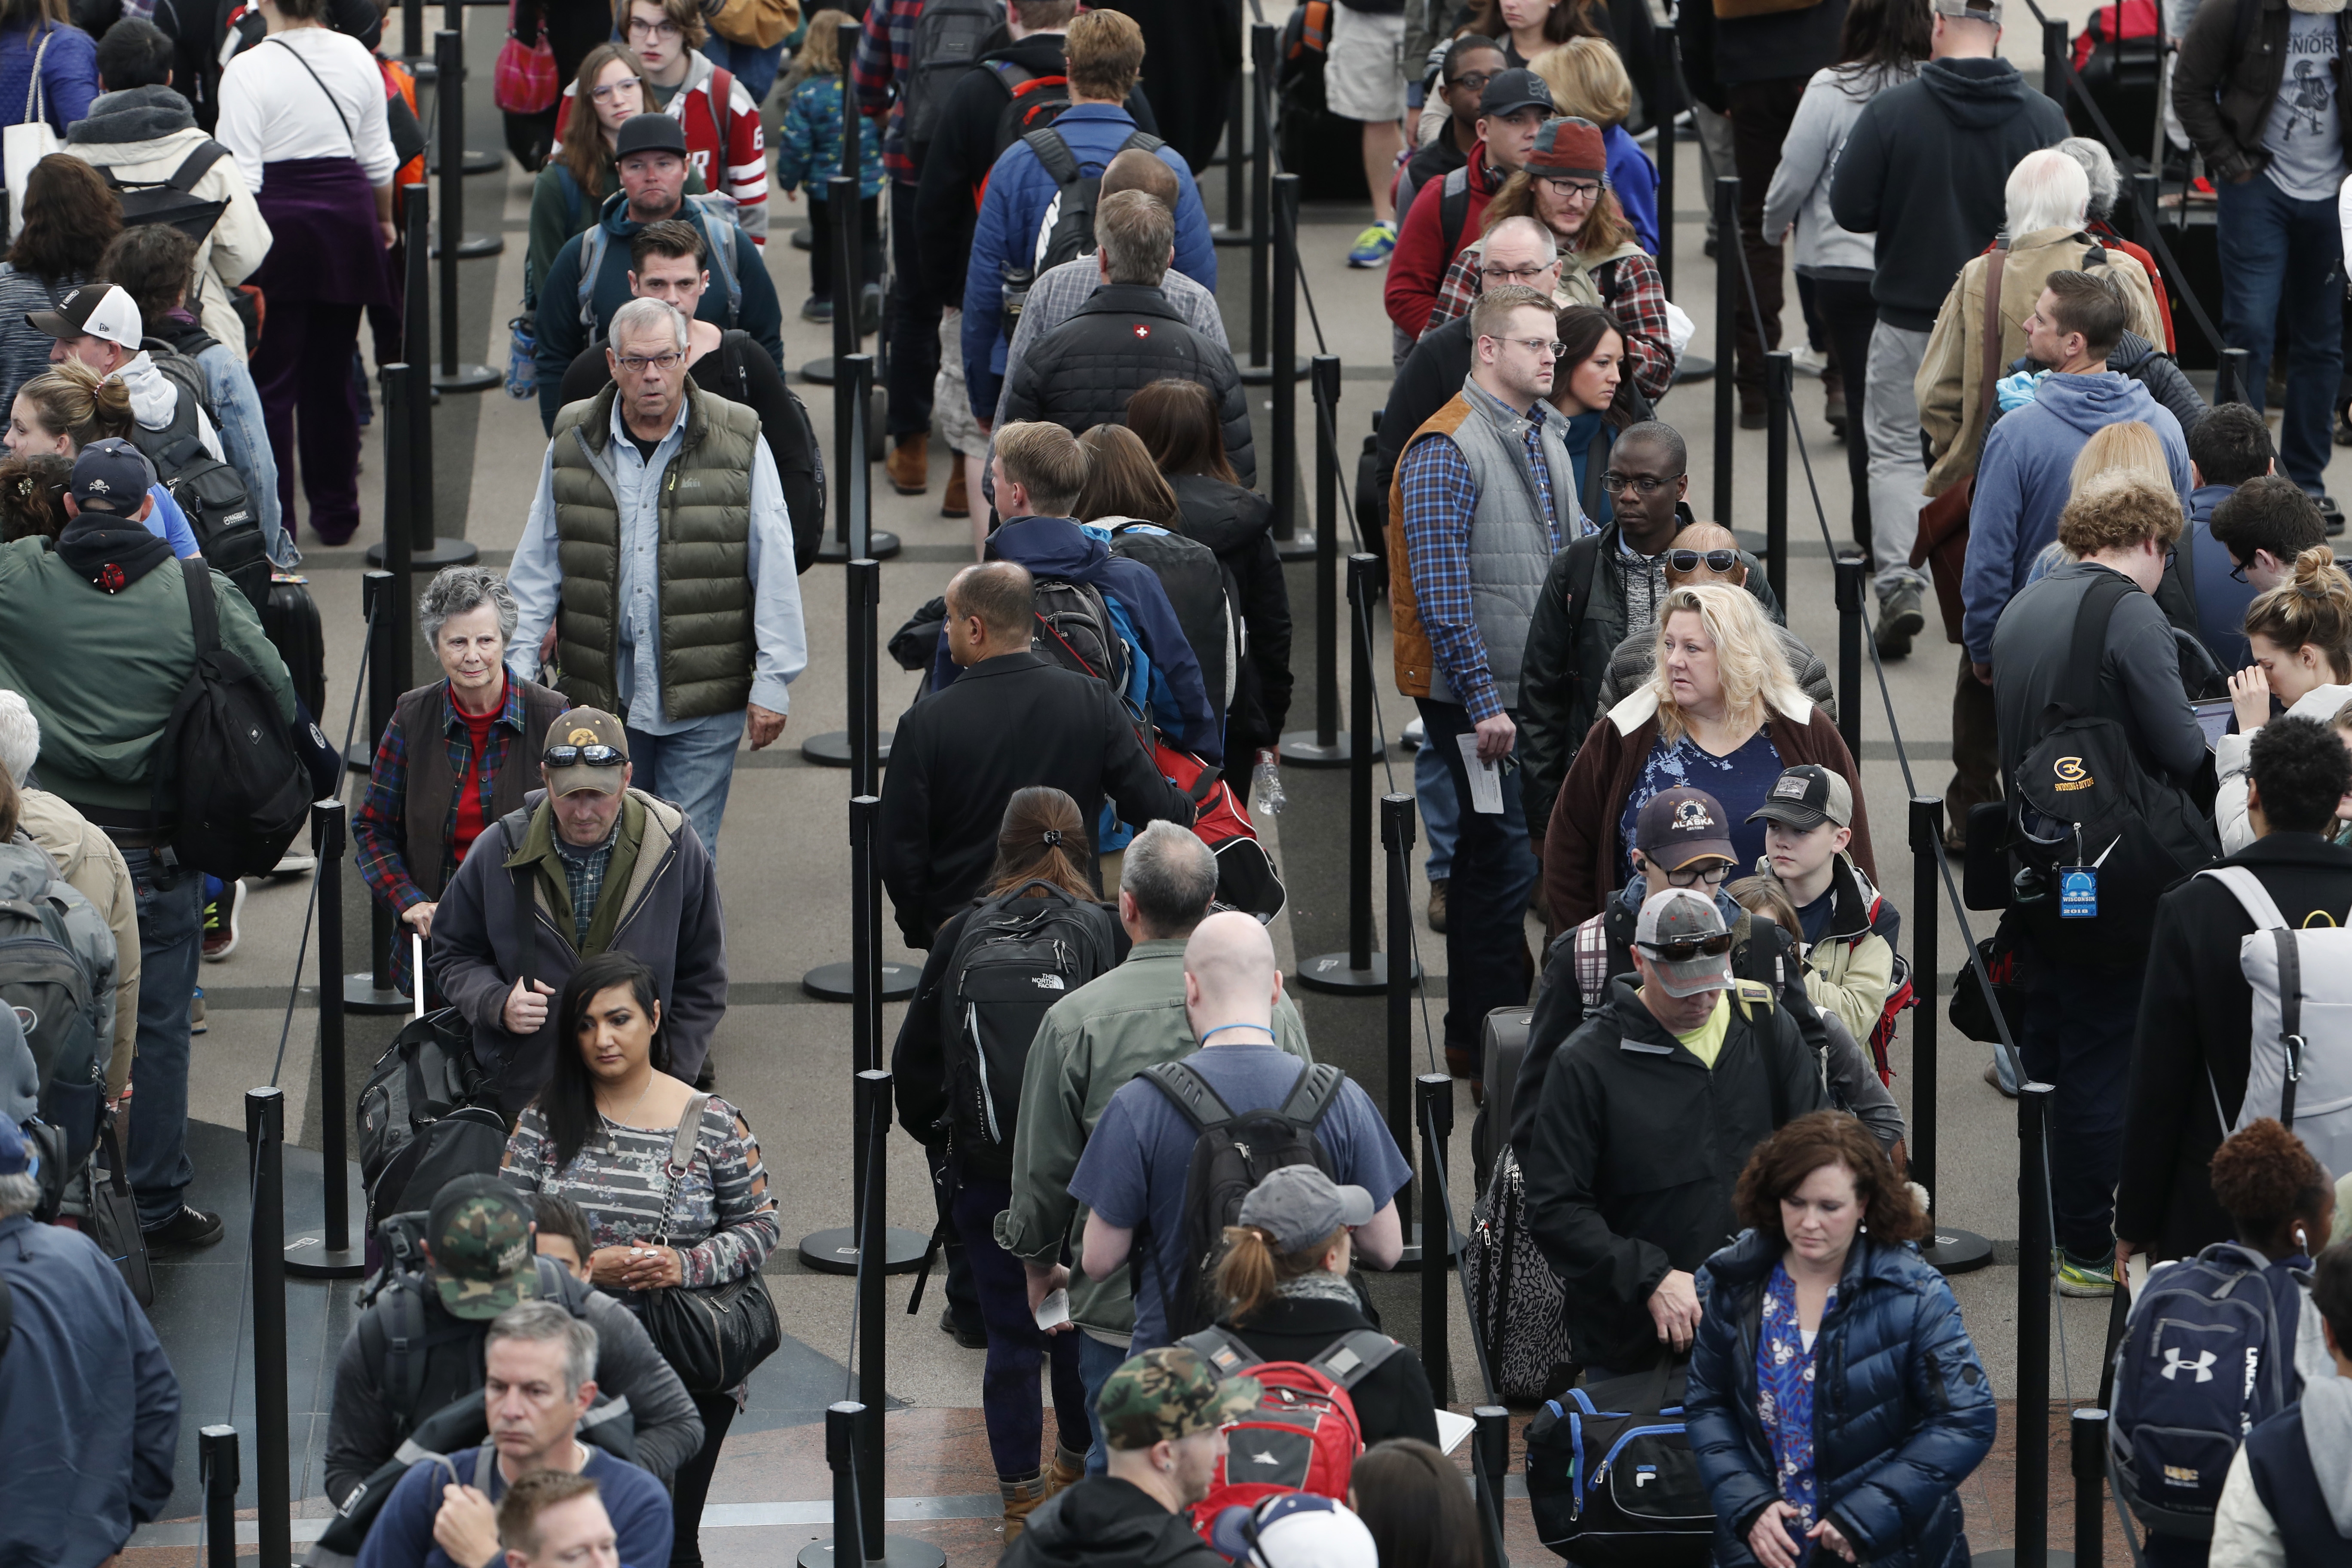 Travelers wait in long lines to pass through a security checkpoint in Denver International Airport Wednesday, Nov. 21, 2018, in Denver. Mild weather in parts of the country and lower gasoline prices have potentially created one of the busiest Thanksgiving Day travel periods since 2005, according to AAA. (AP Photo/David Zalubowski)